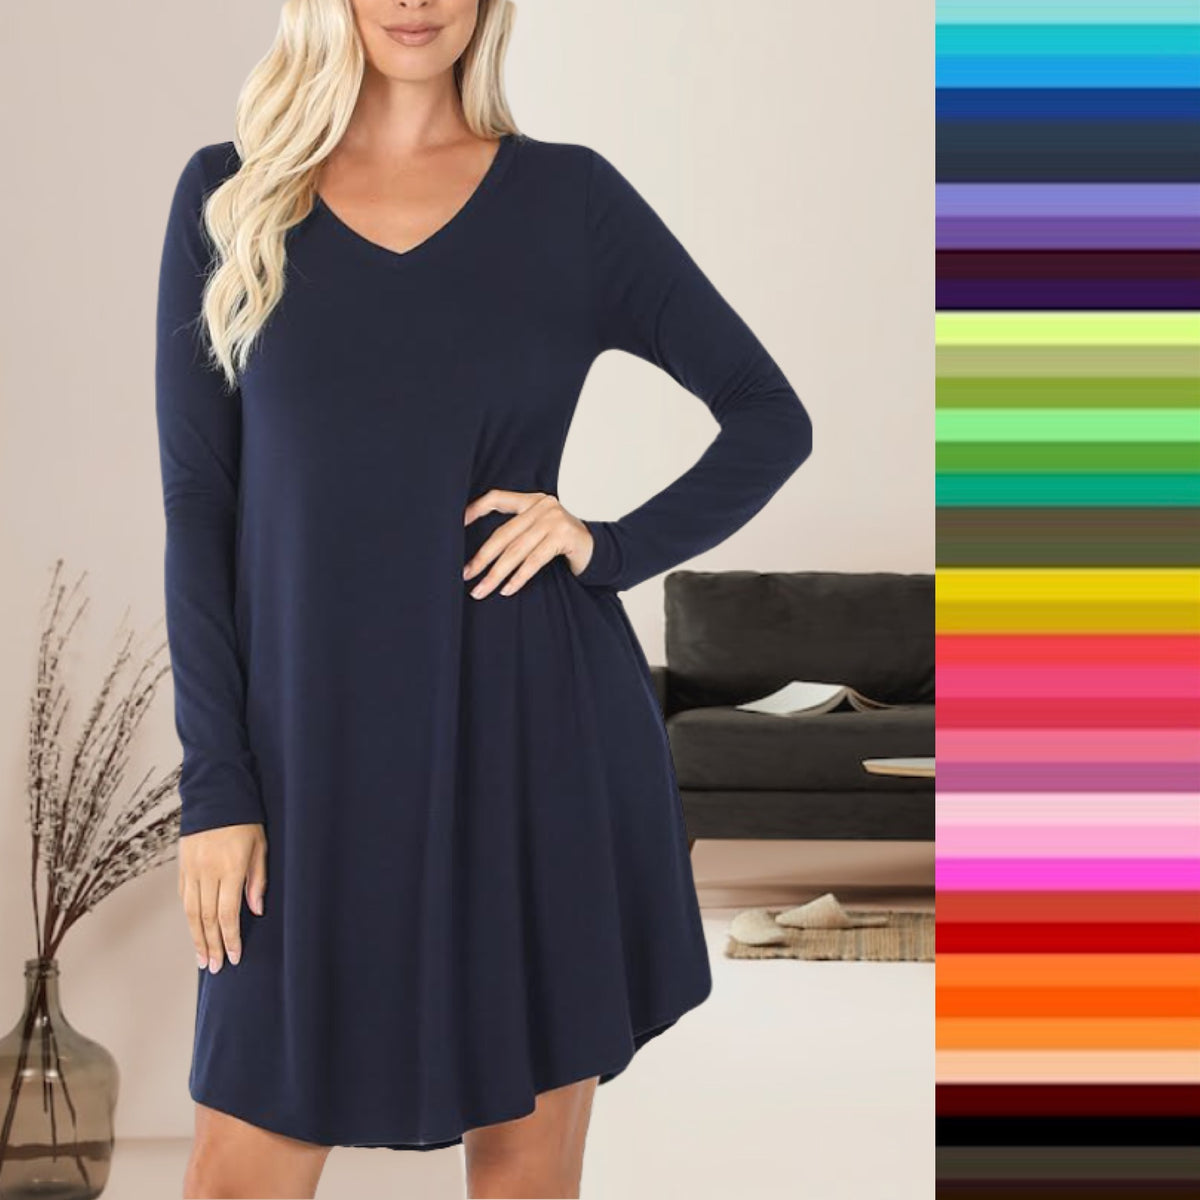 Linda Long Sleeve Womens Dress with Pockets v-neck rounded hemline available in 9 colors